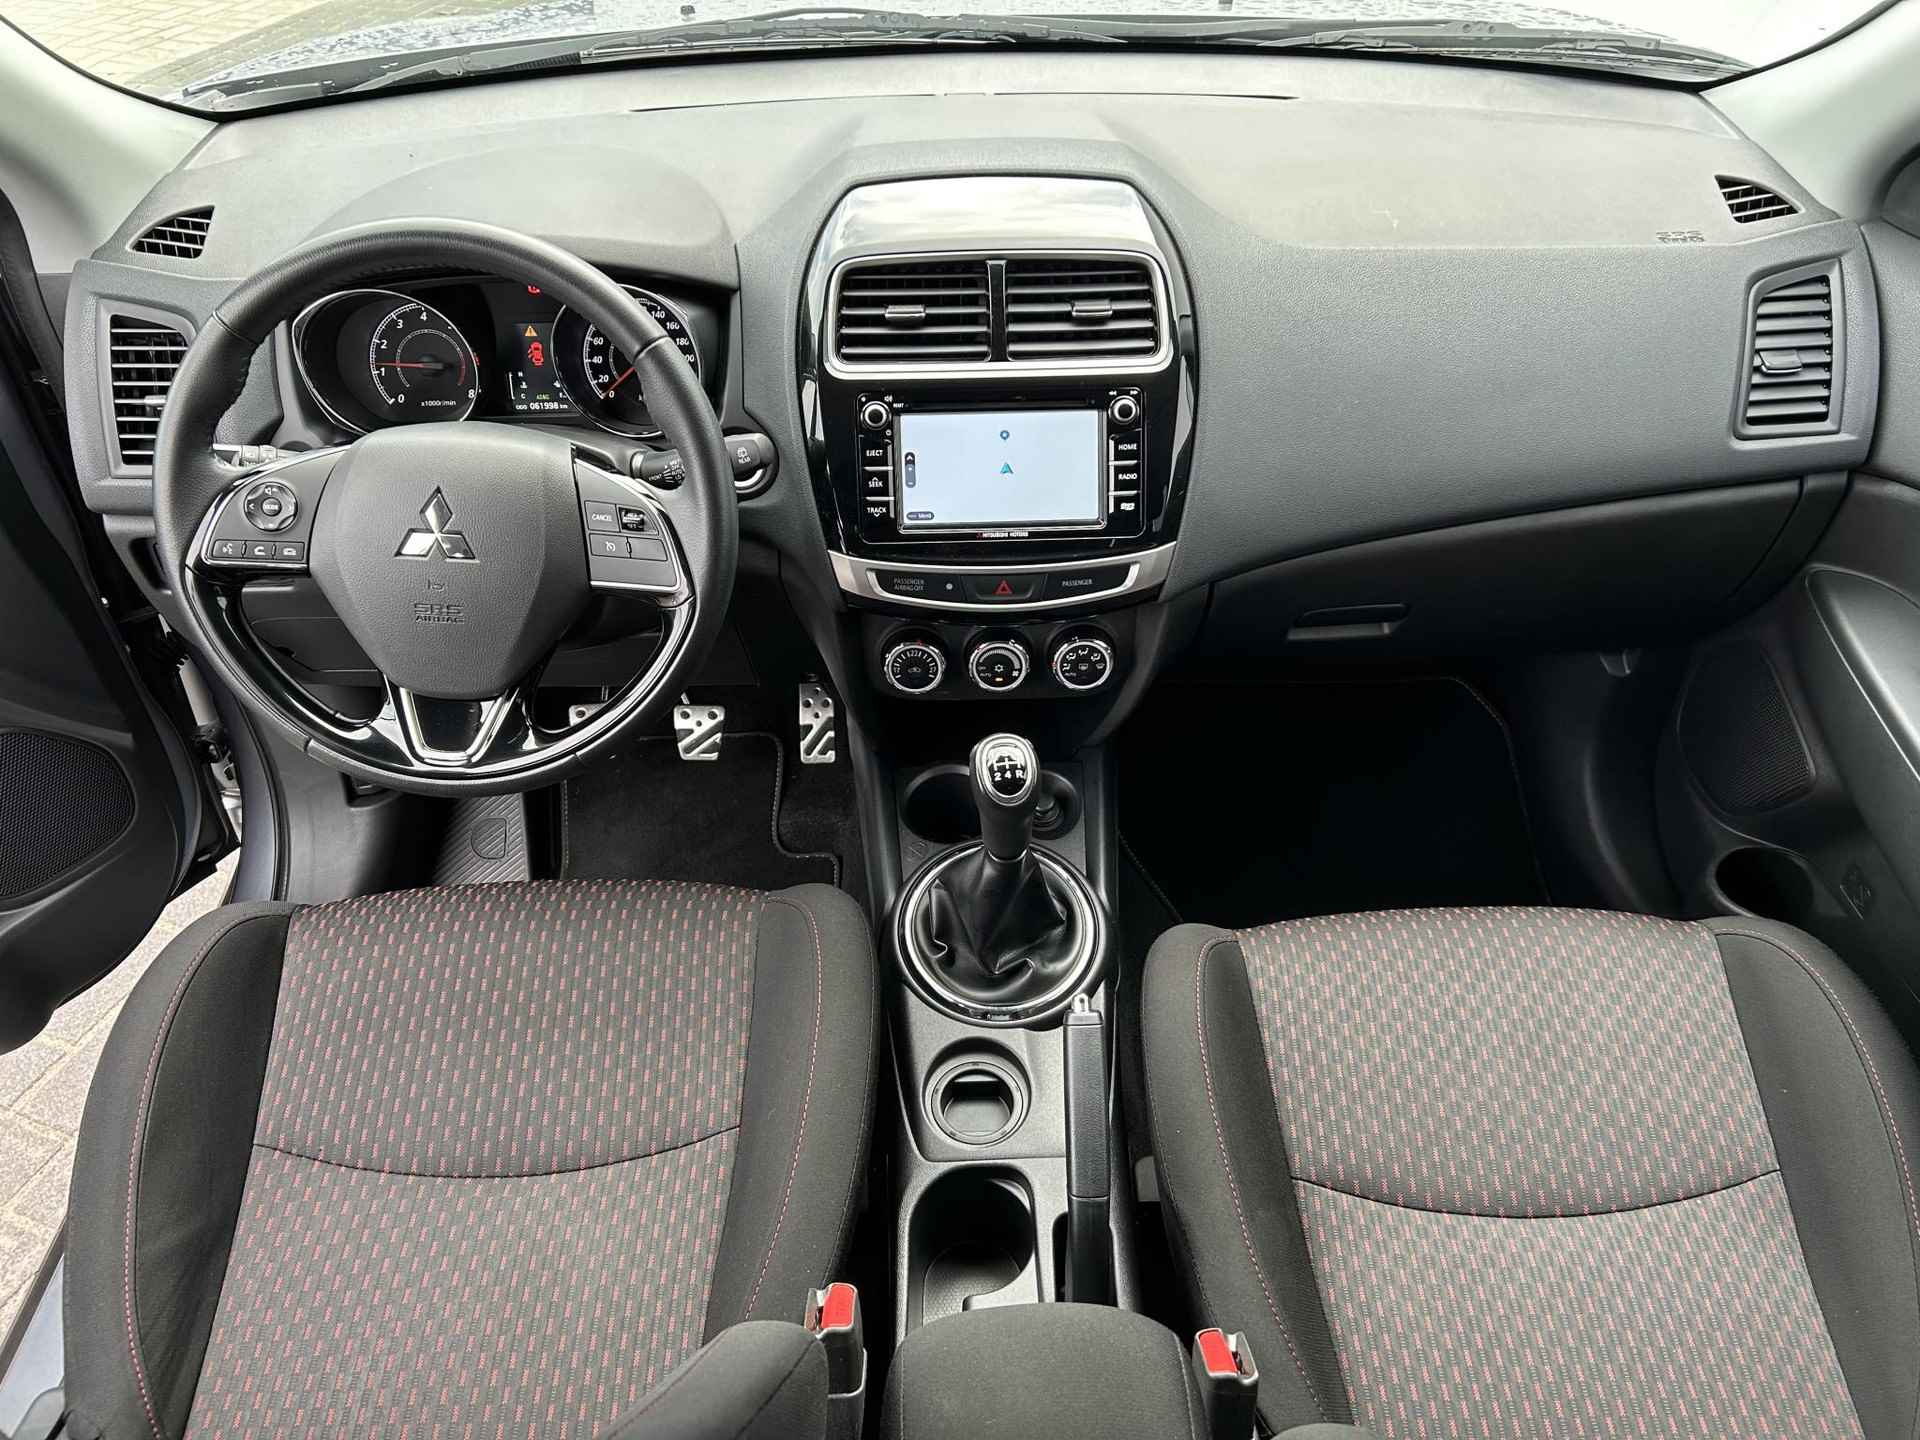 Mitsubishi ASX 1.6 Cleartec Connect Pro / Achteruitrijcamera / Trekhaak / Cruise control / Apple Carplay/Android Auto / INCLUSIEF WINTERSET - 2/36